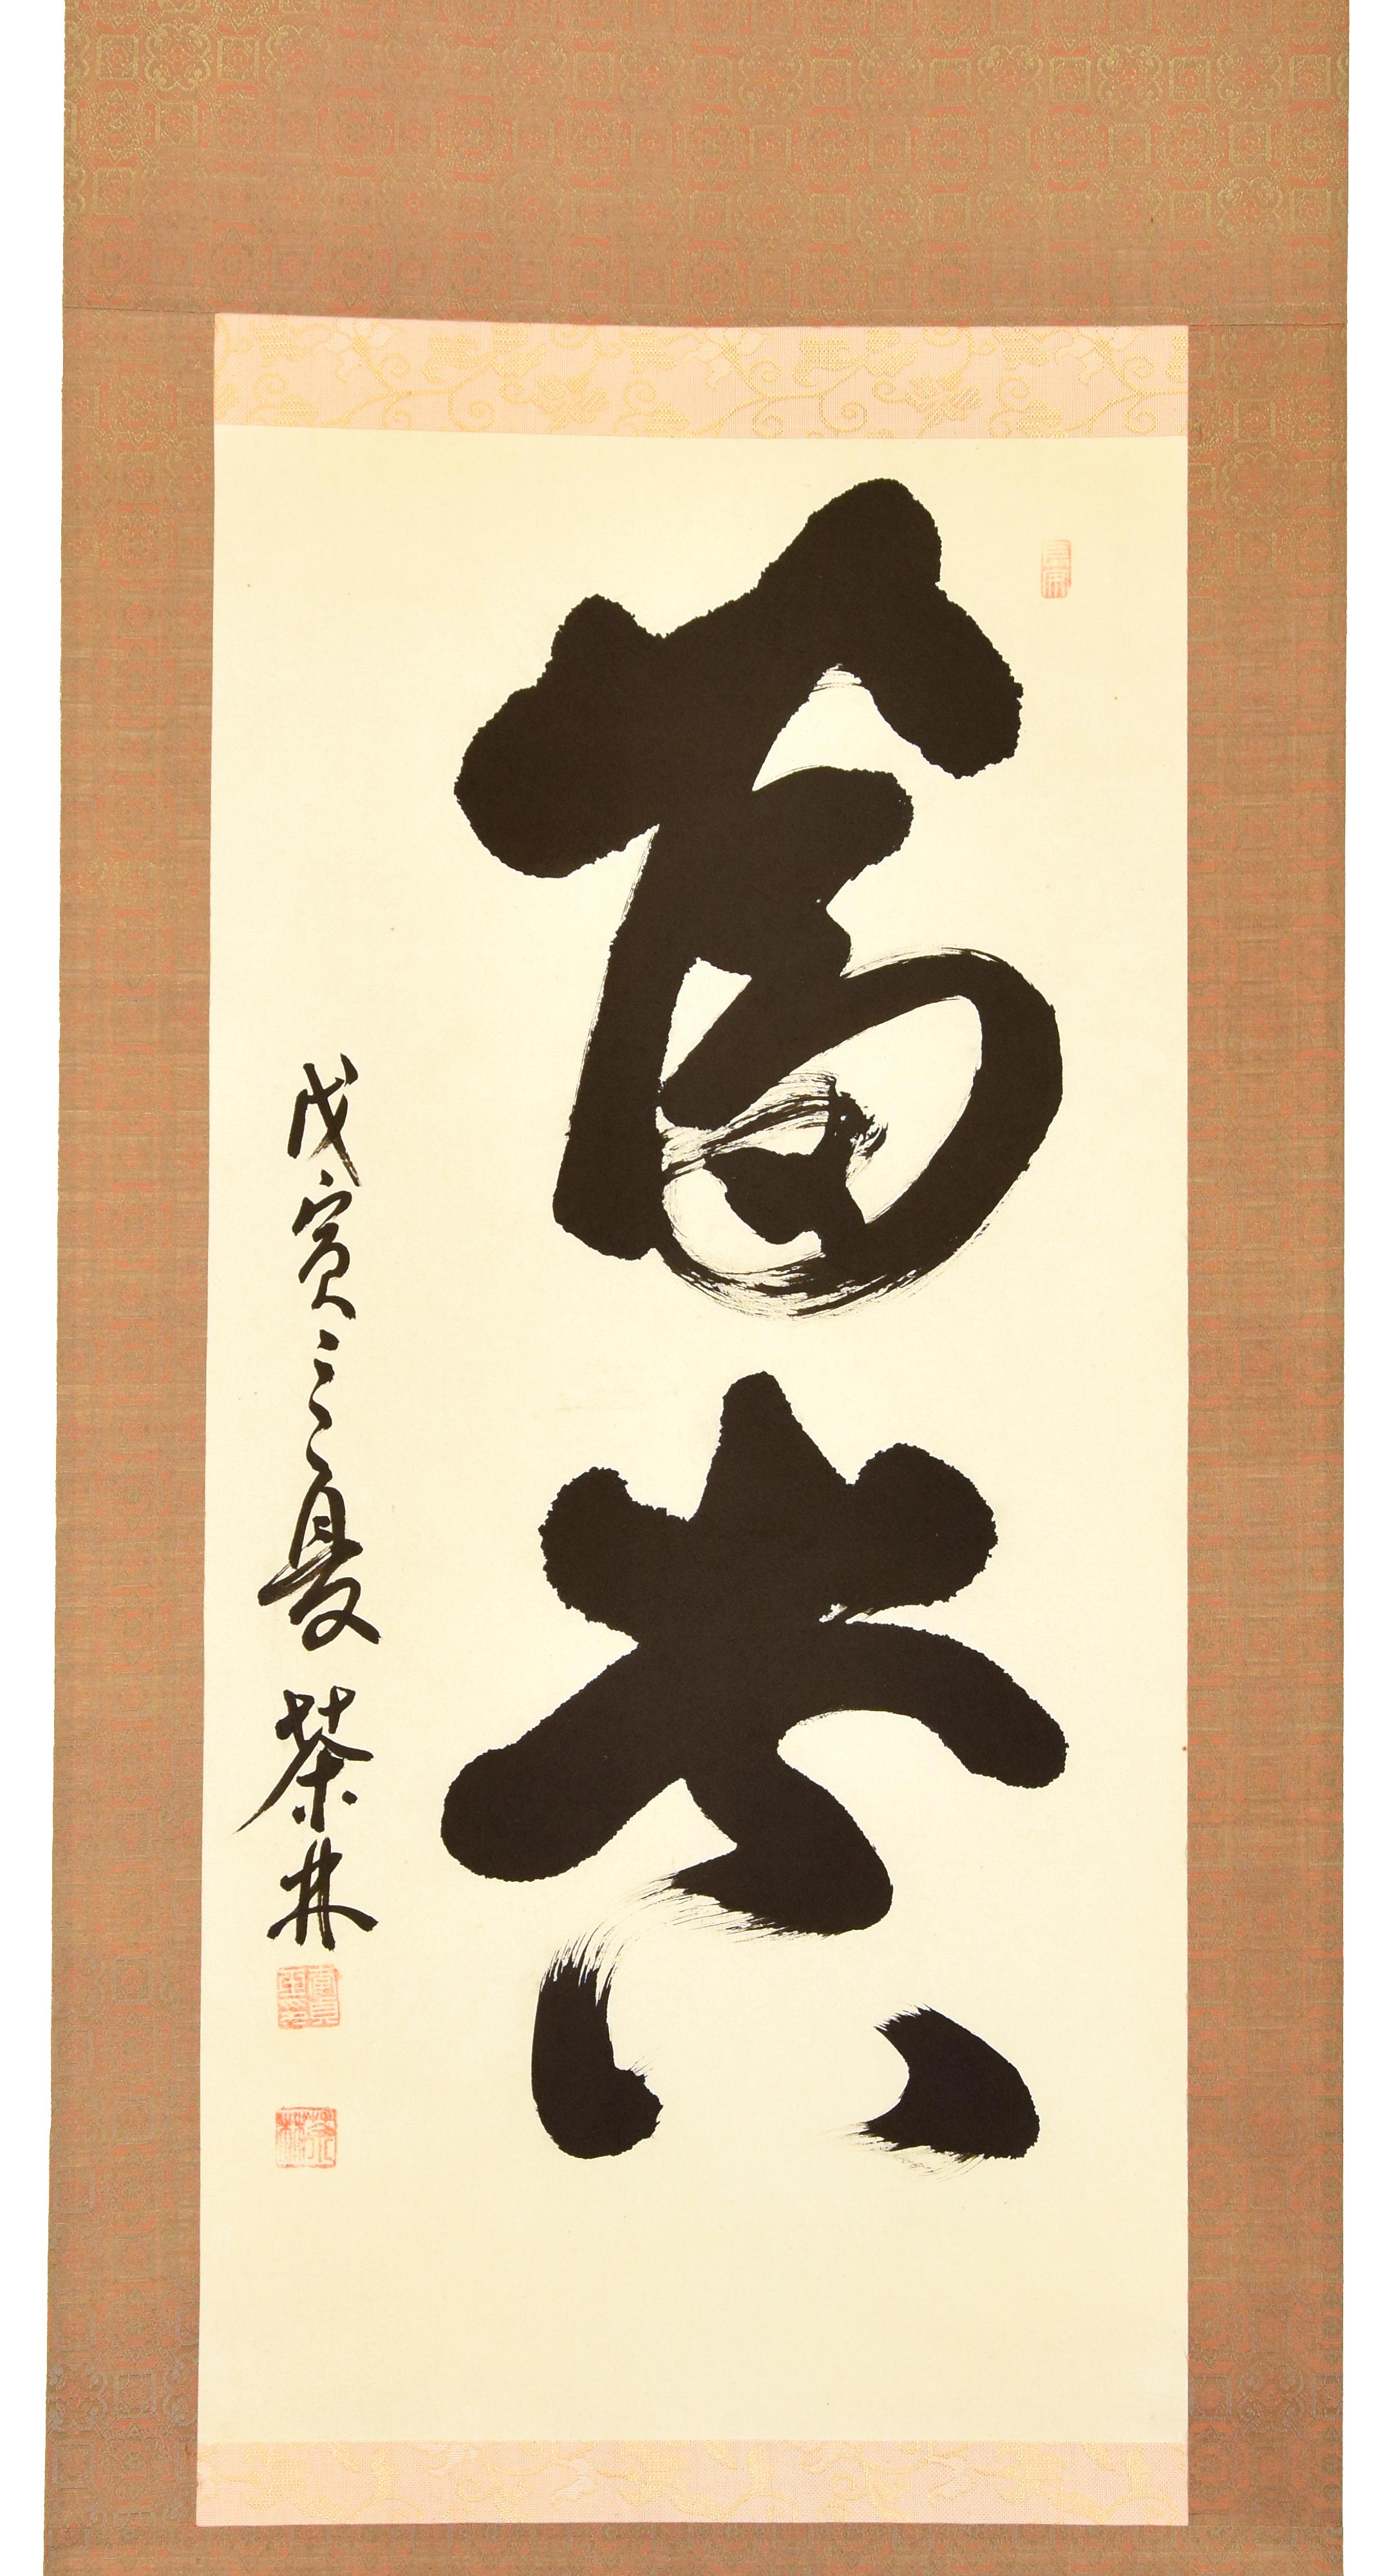 Fu Gui is a beautiful artistic calligraphy in China ink on Xuan paper realized by the Chinese artist Li Zhen in 1938.

The year and place of creation "1938, Tea Field" in black ink are present on the left of the scroll. Below, the stamp (made of